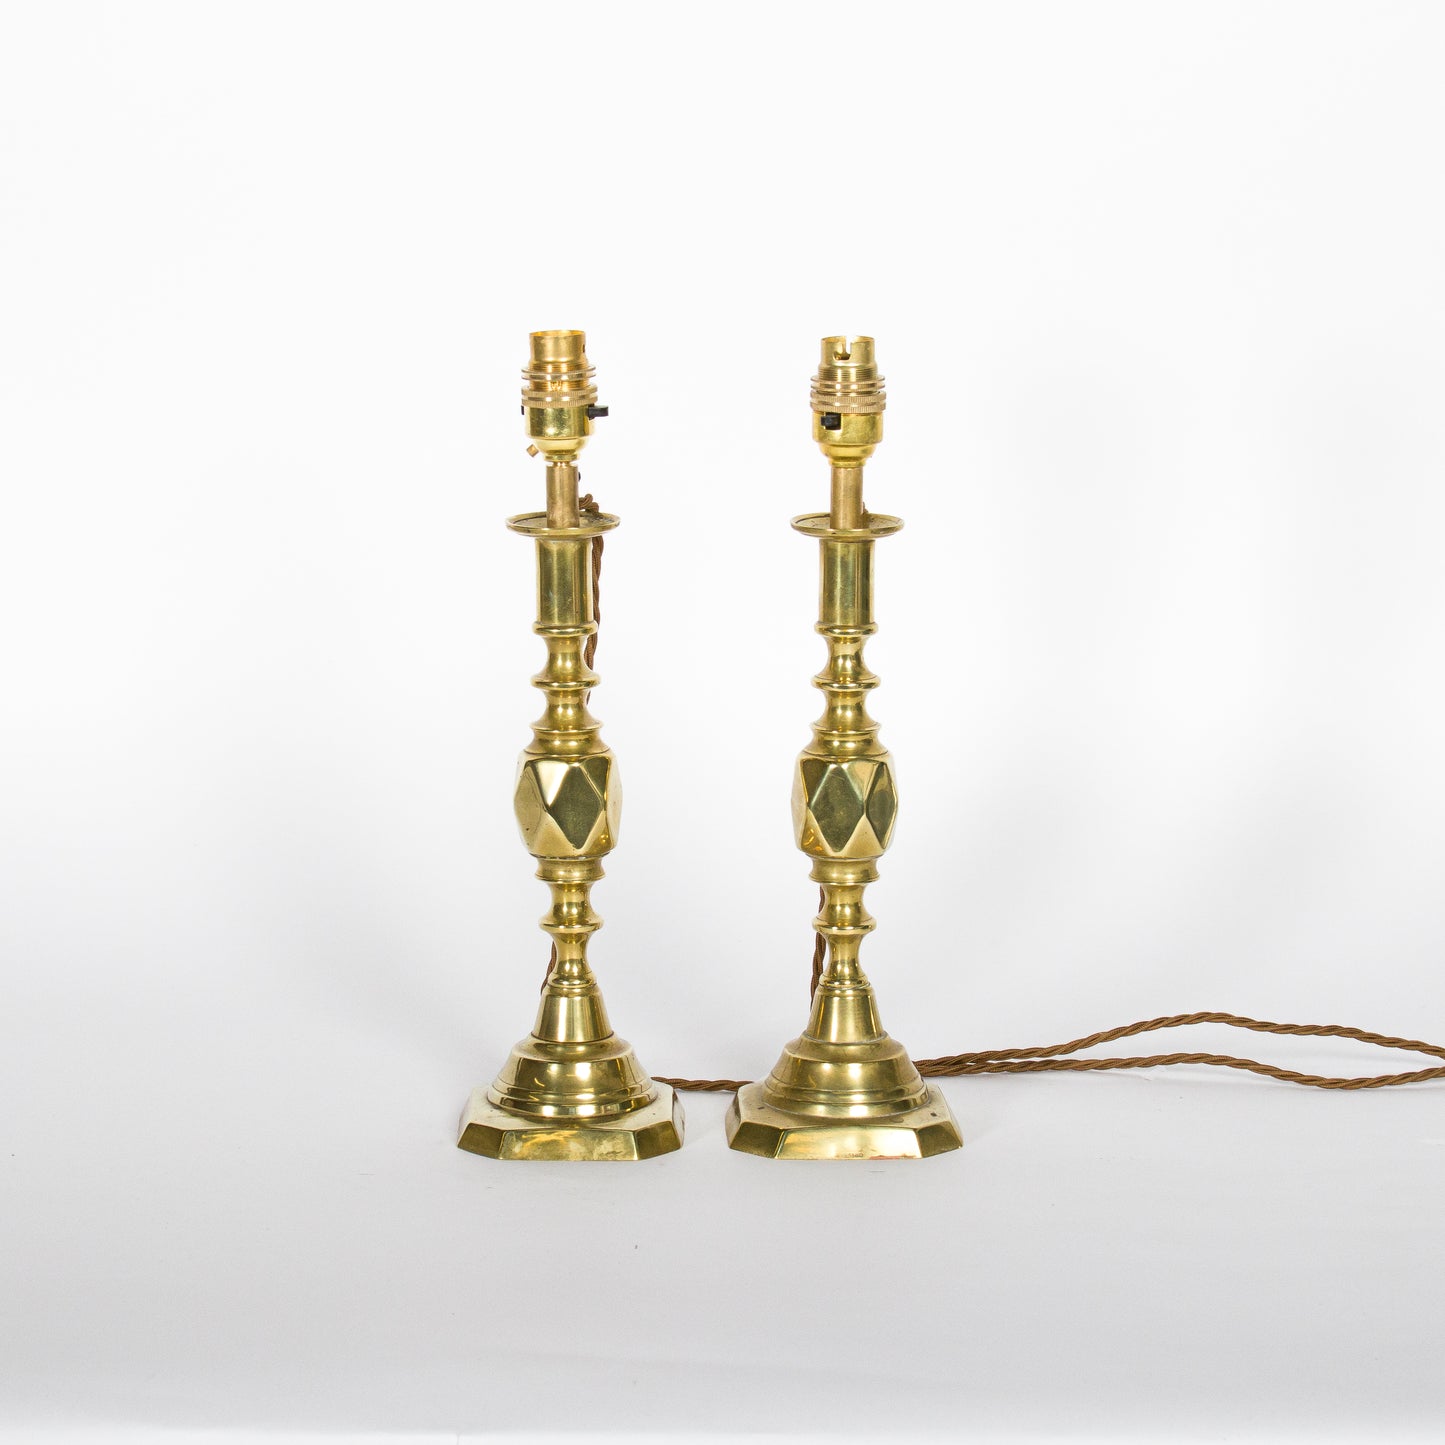 A pair of brass candlesticks converted to lamps - ’The Diamond Princess’